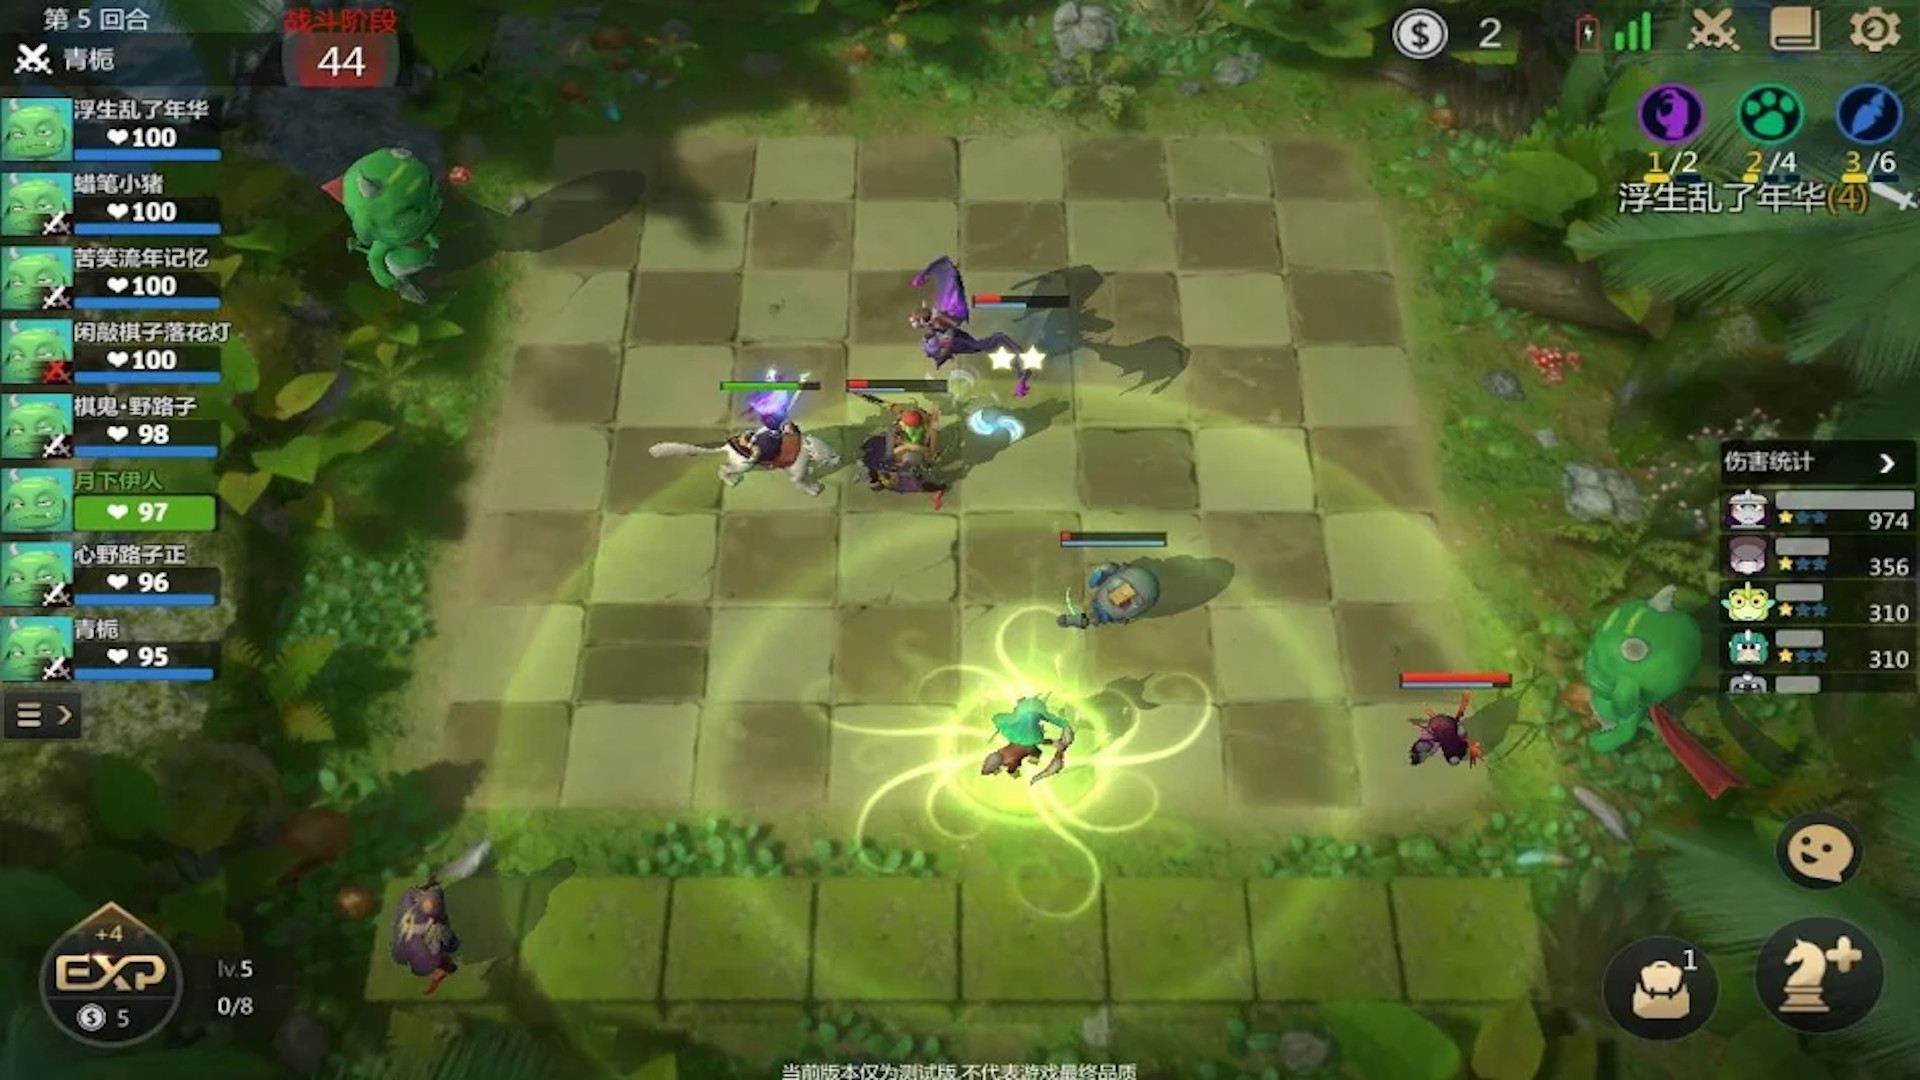 The best auto chess games on mobile 2021